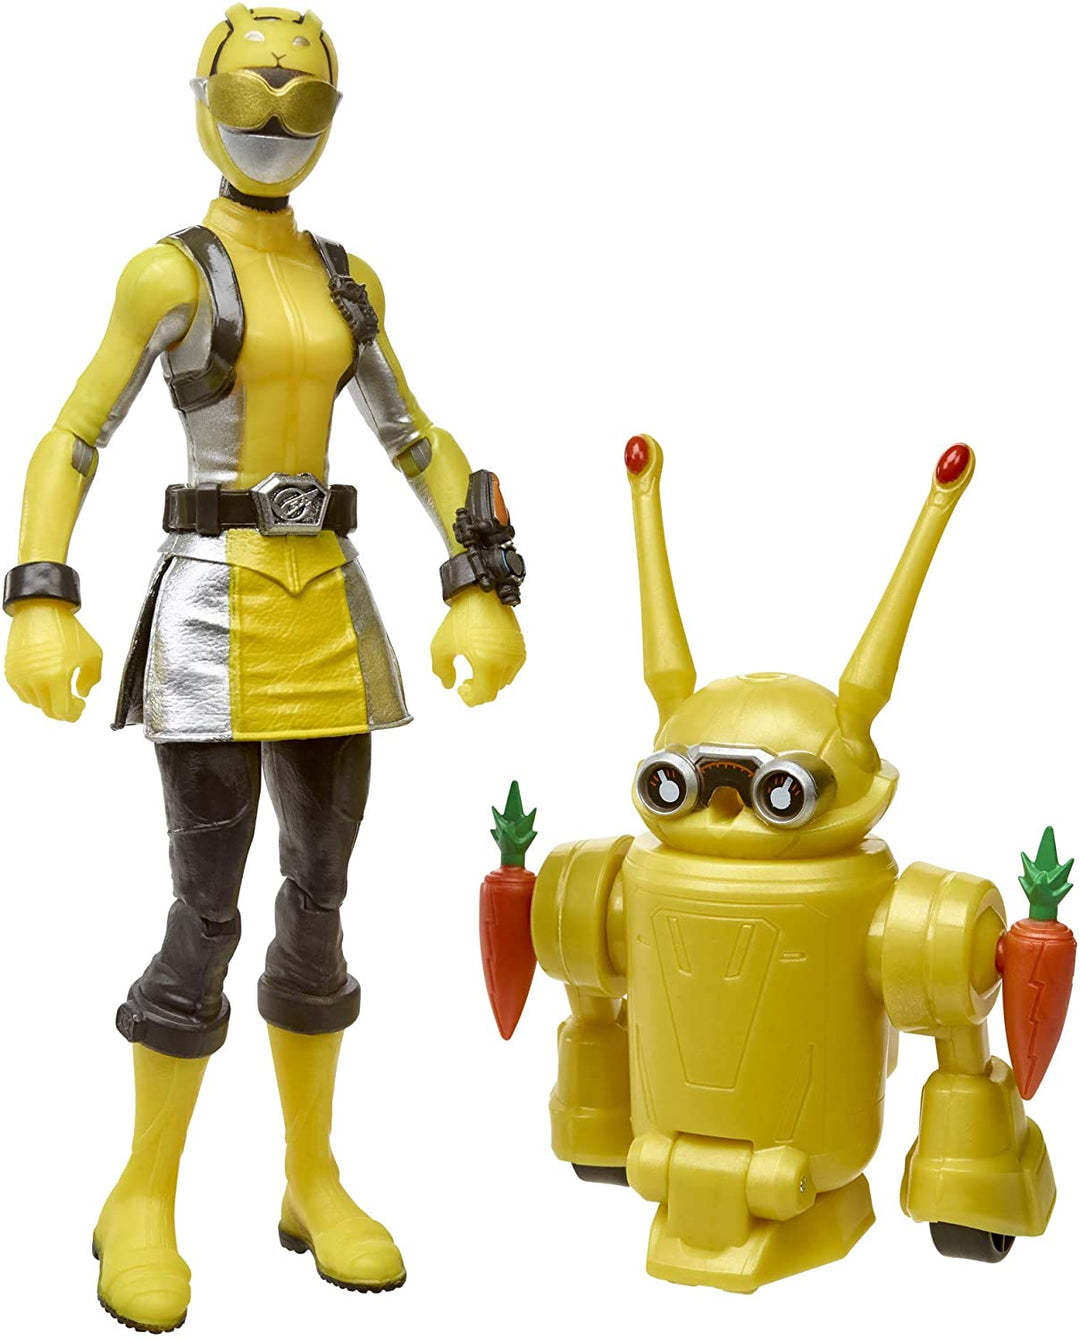 Power Rangers Beast Morphers Yellow Ranger and Morphin Jax Beast Bot 15-cm Action Figure 2-Pack Toys Inspired by the TV Programme